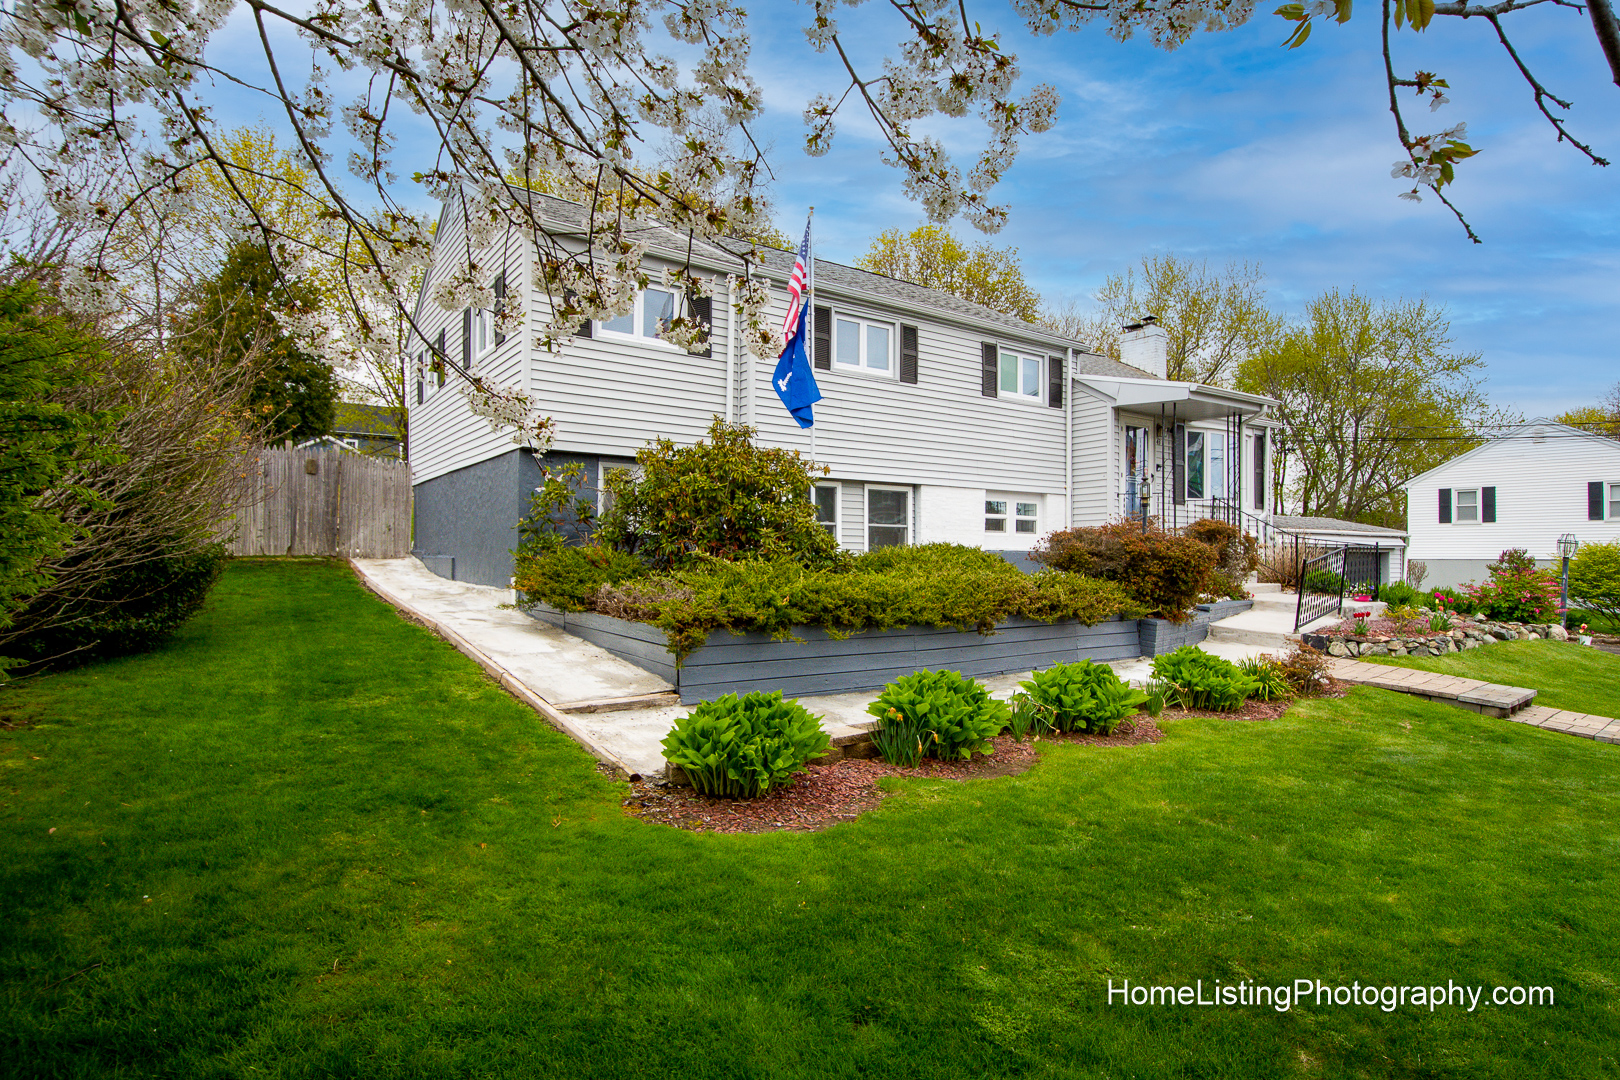 Thomas Adach - Woburn MA professional real estate photographer - 508-655-2225 - Home Listing Photography